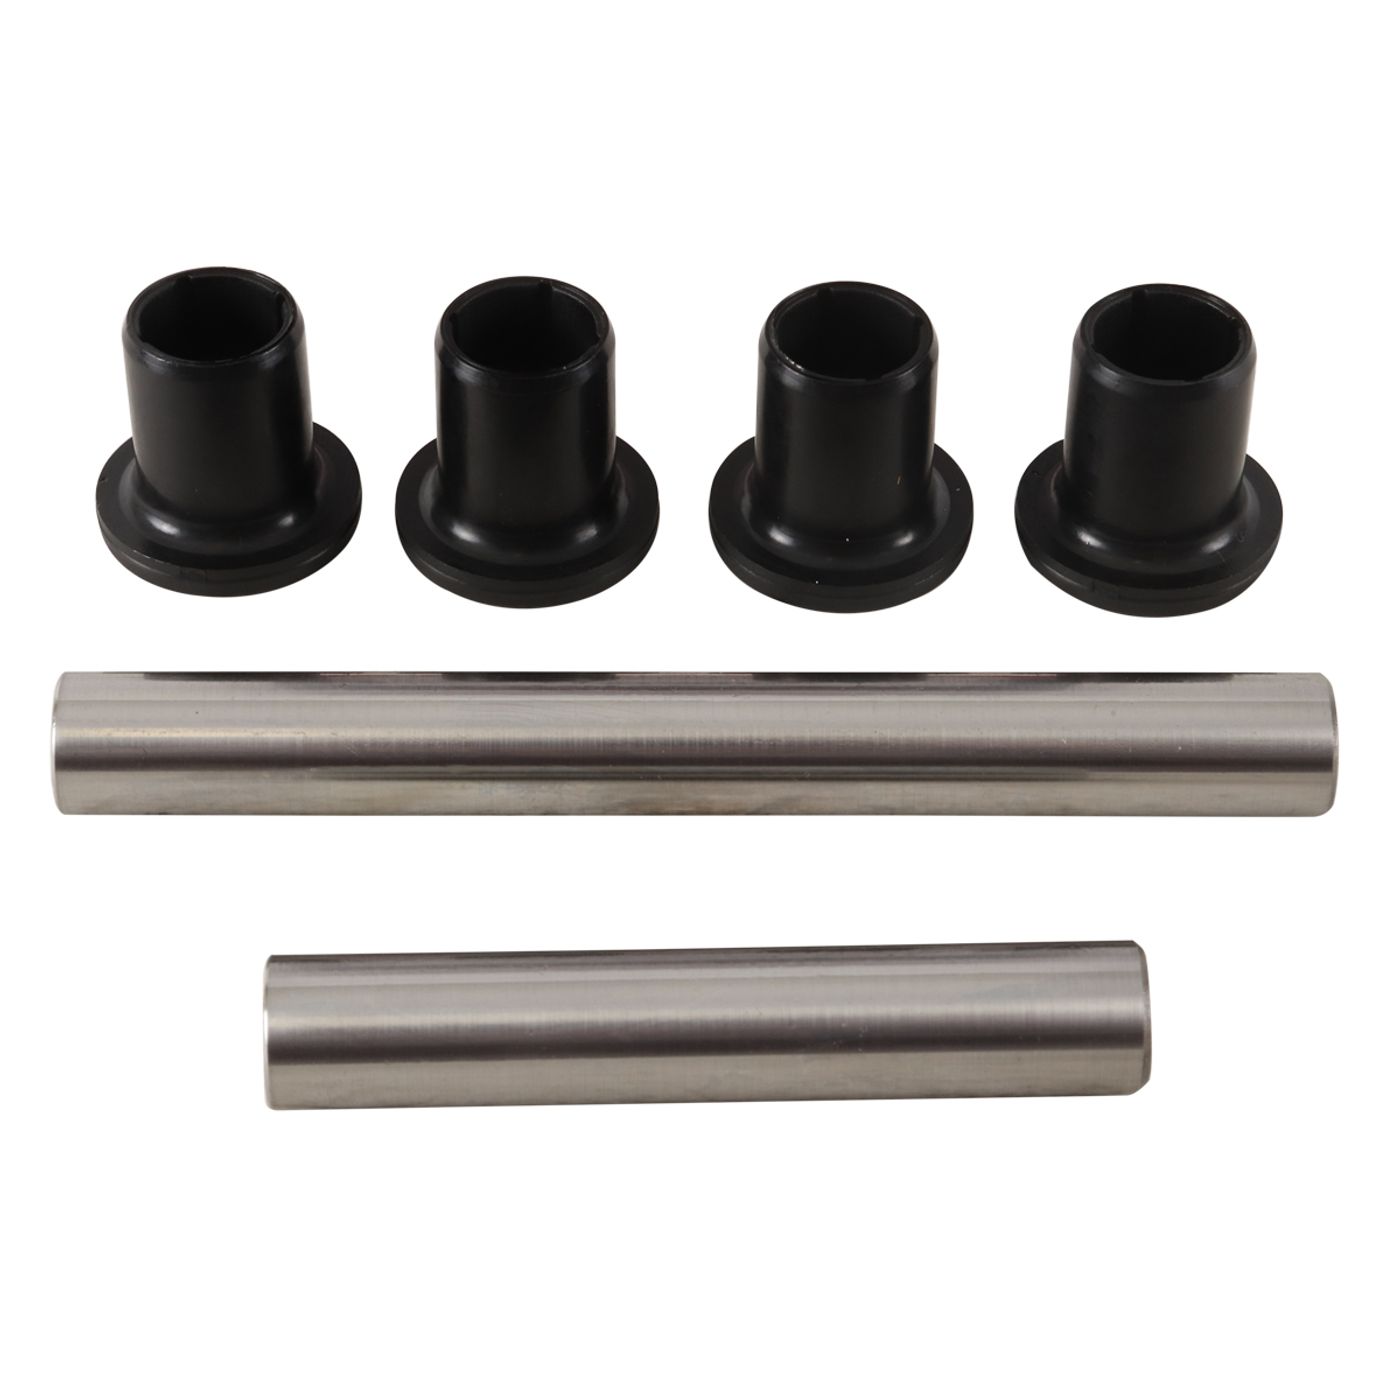 Wrp Rear Ind. Suspension Kits - WRP501219 image